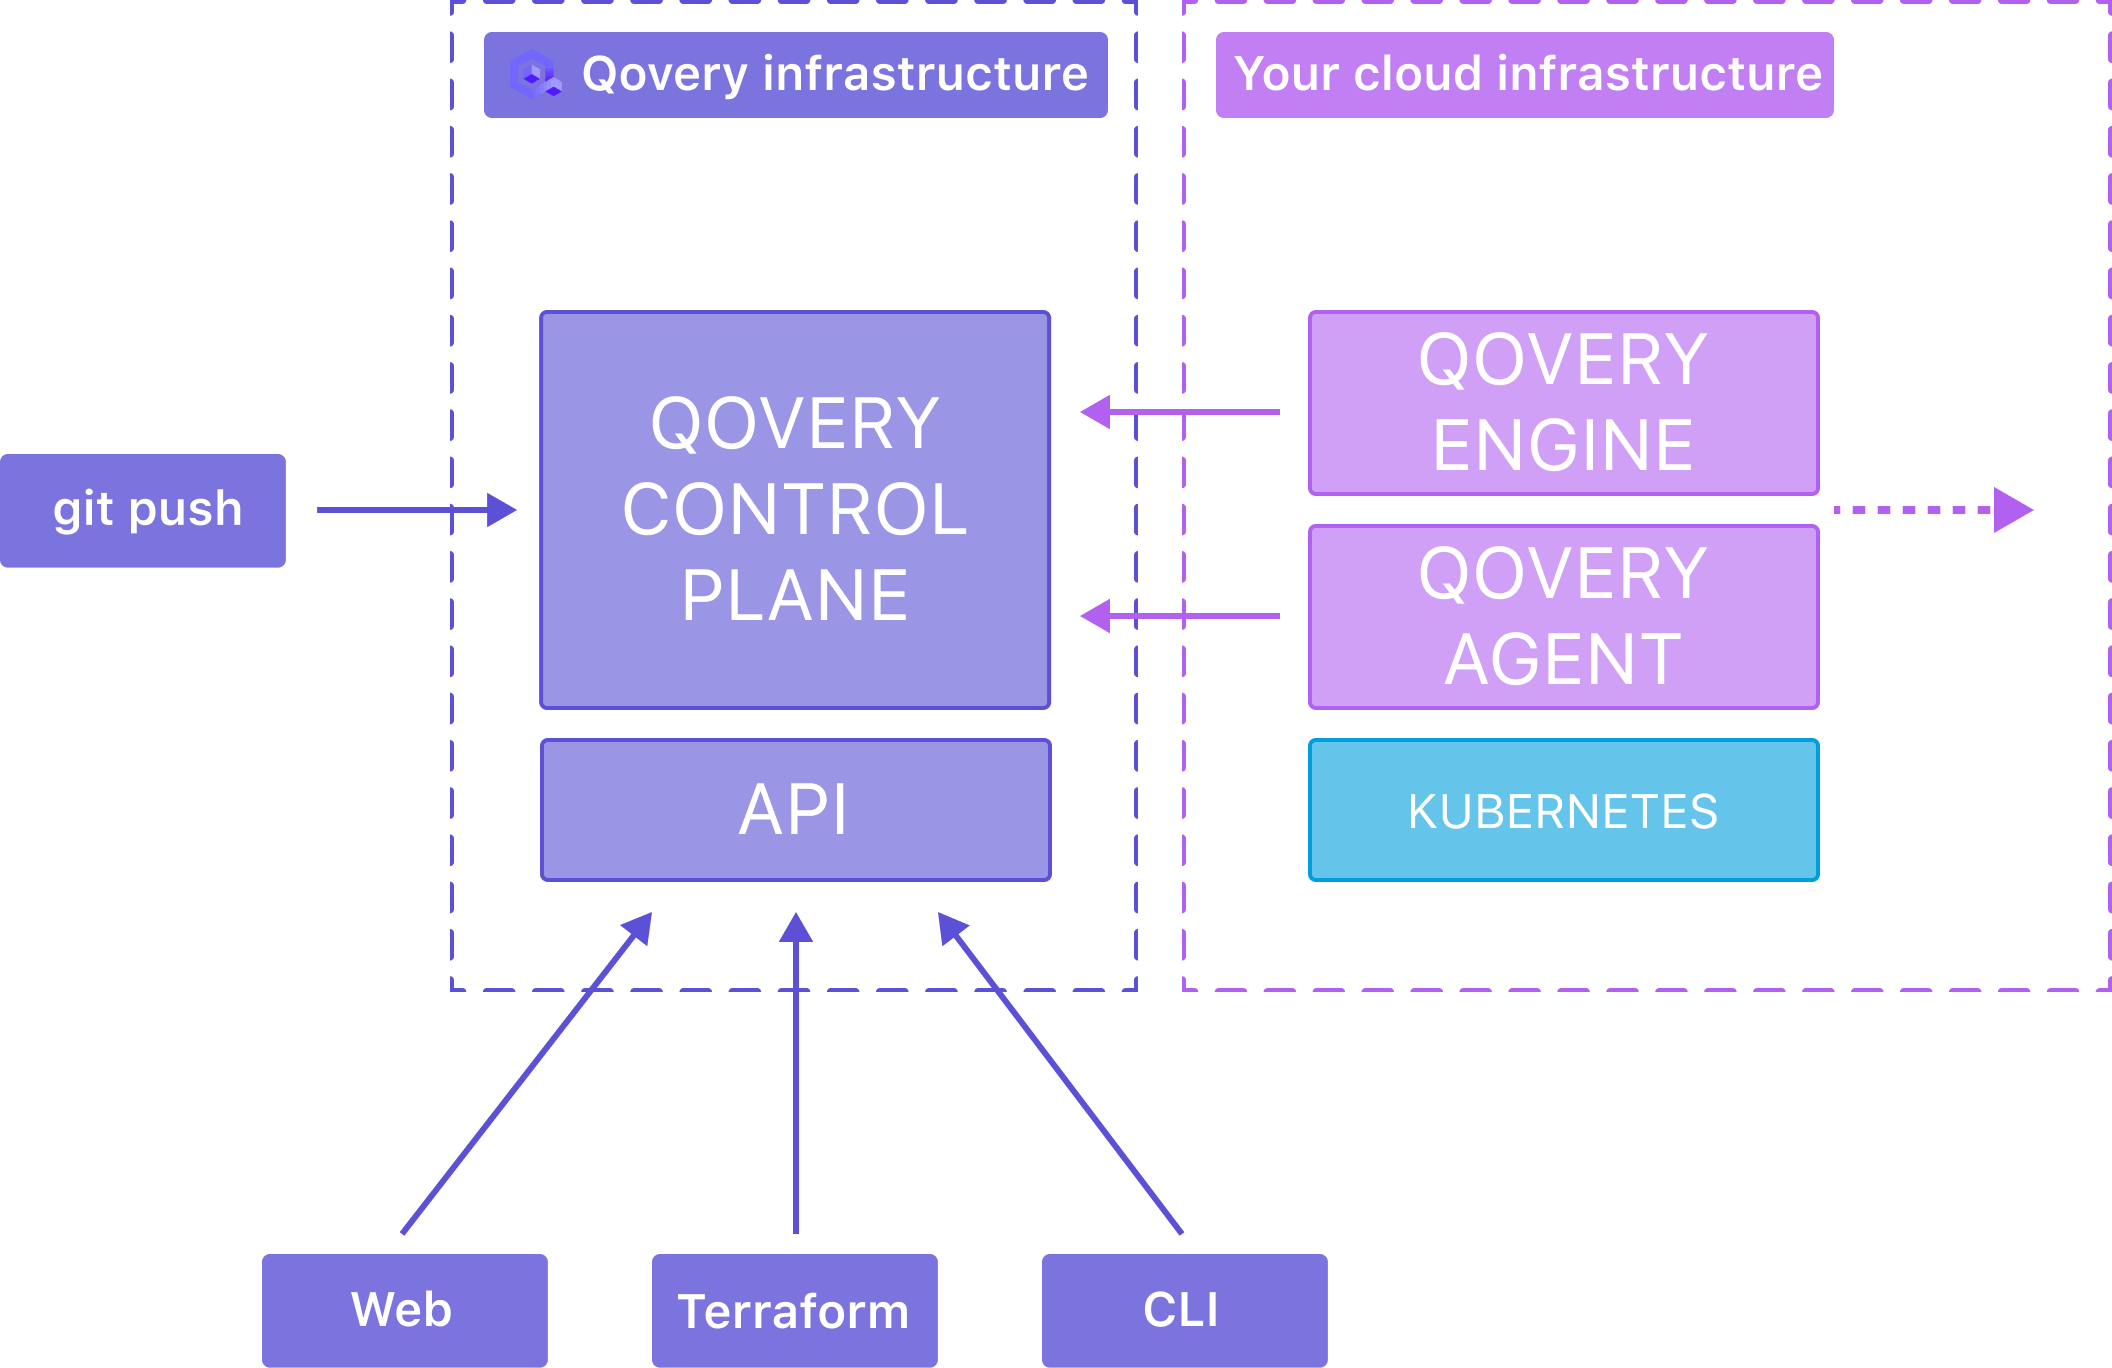 How Qovery infrastructure works